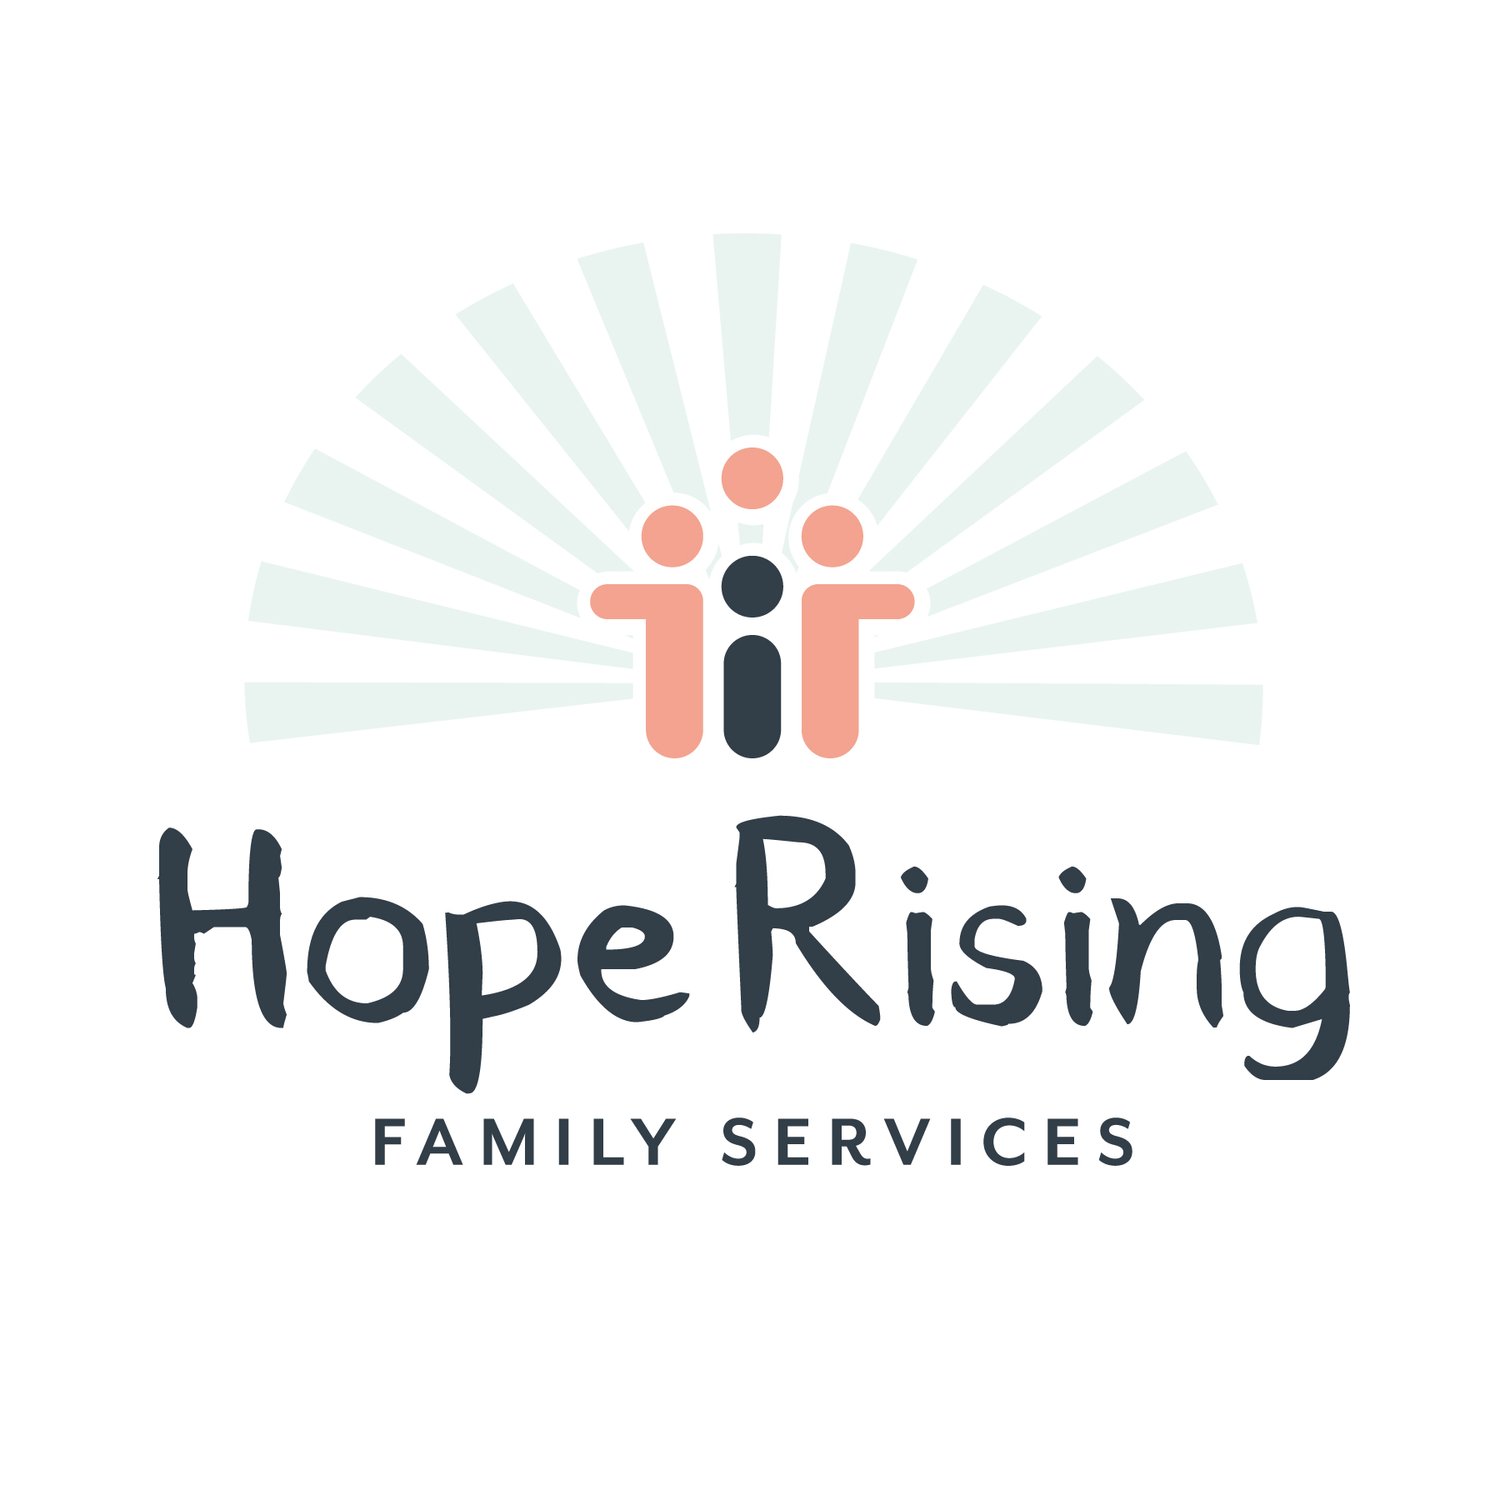 Hope Rising Family Services